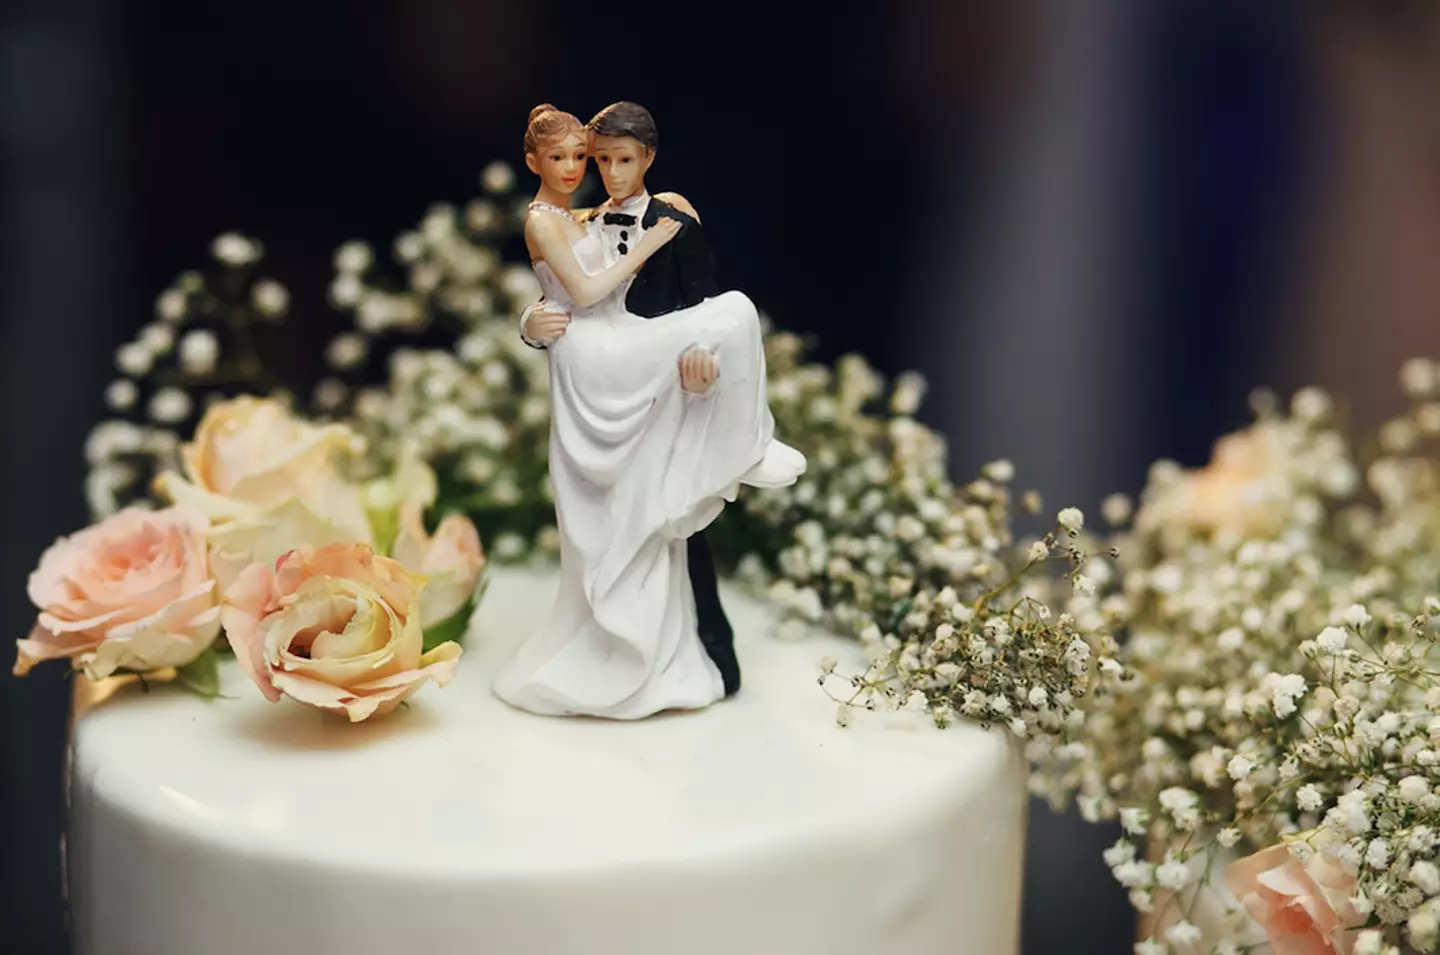 Some find cake toppers tacky (